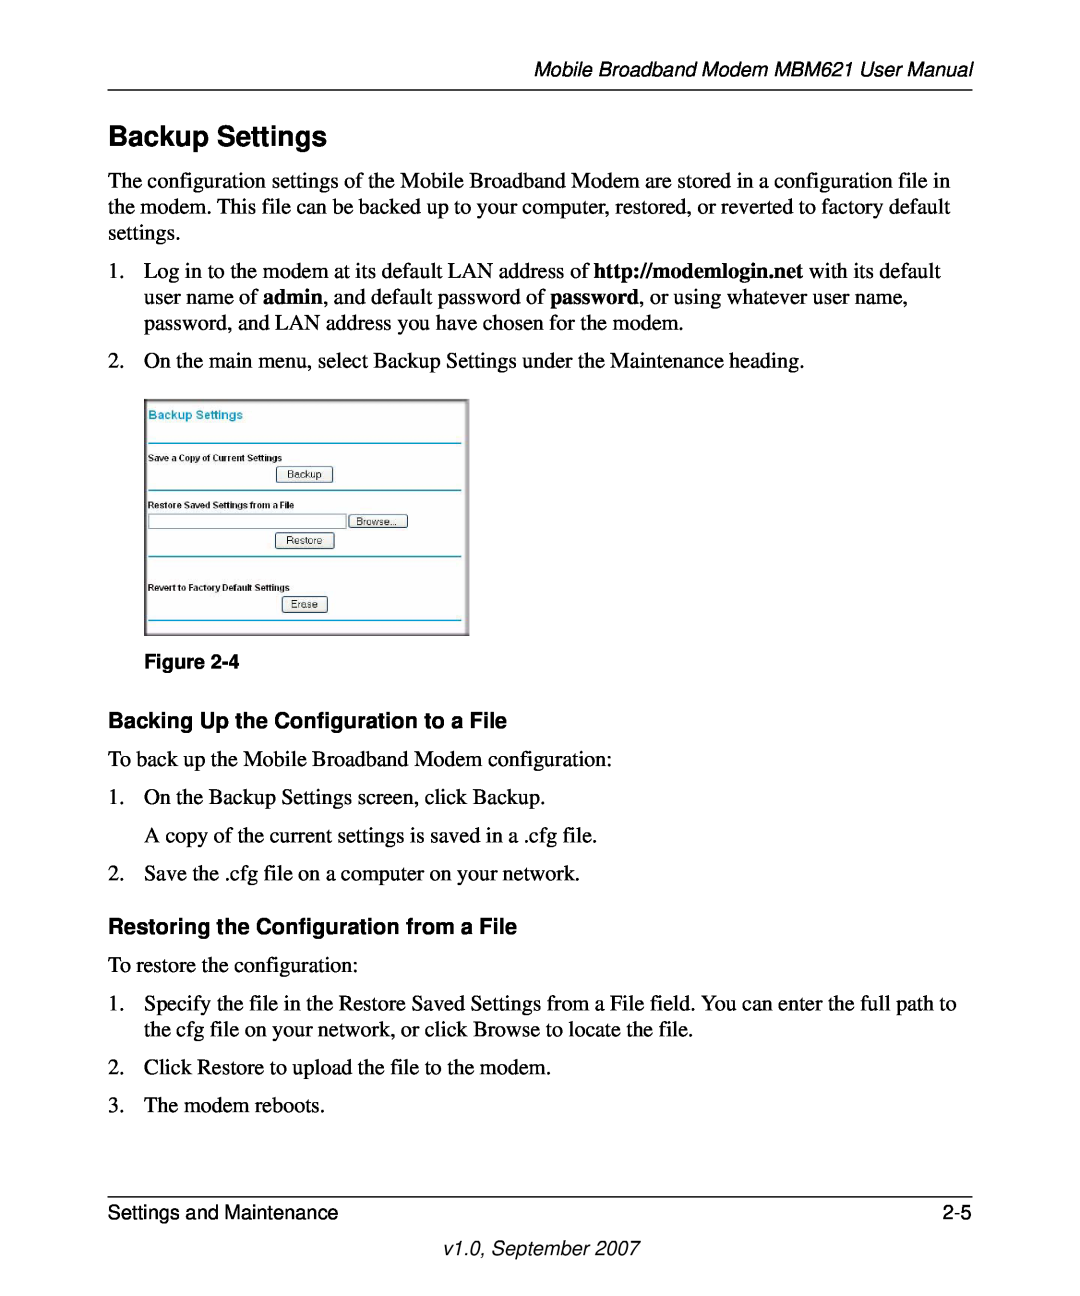 NETGEAR MBM621 user manual Backup Settings, Backing Up the Configuration to a File, Restoring the Configuration from a File 